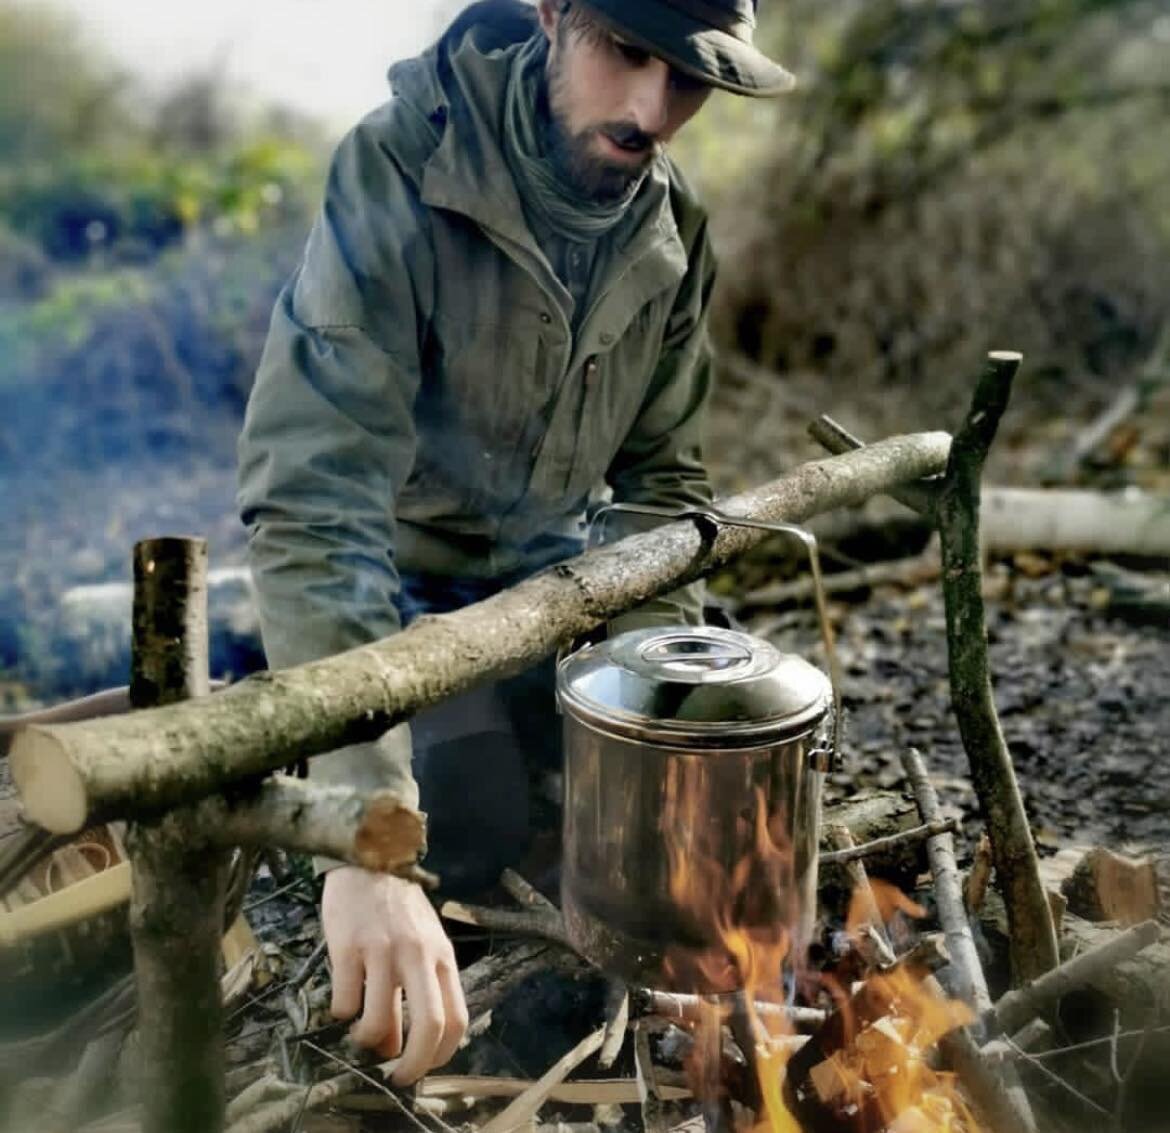 Let us introduce to you Bracken!! 

Bracken is our resident outdoor guide/bush craft expert here at Fire &amp; Stars Woodland Camping

This season we will be hosting a series of events in the woodland for you to come along and join, all under Bracken